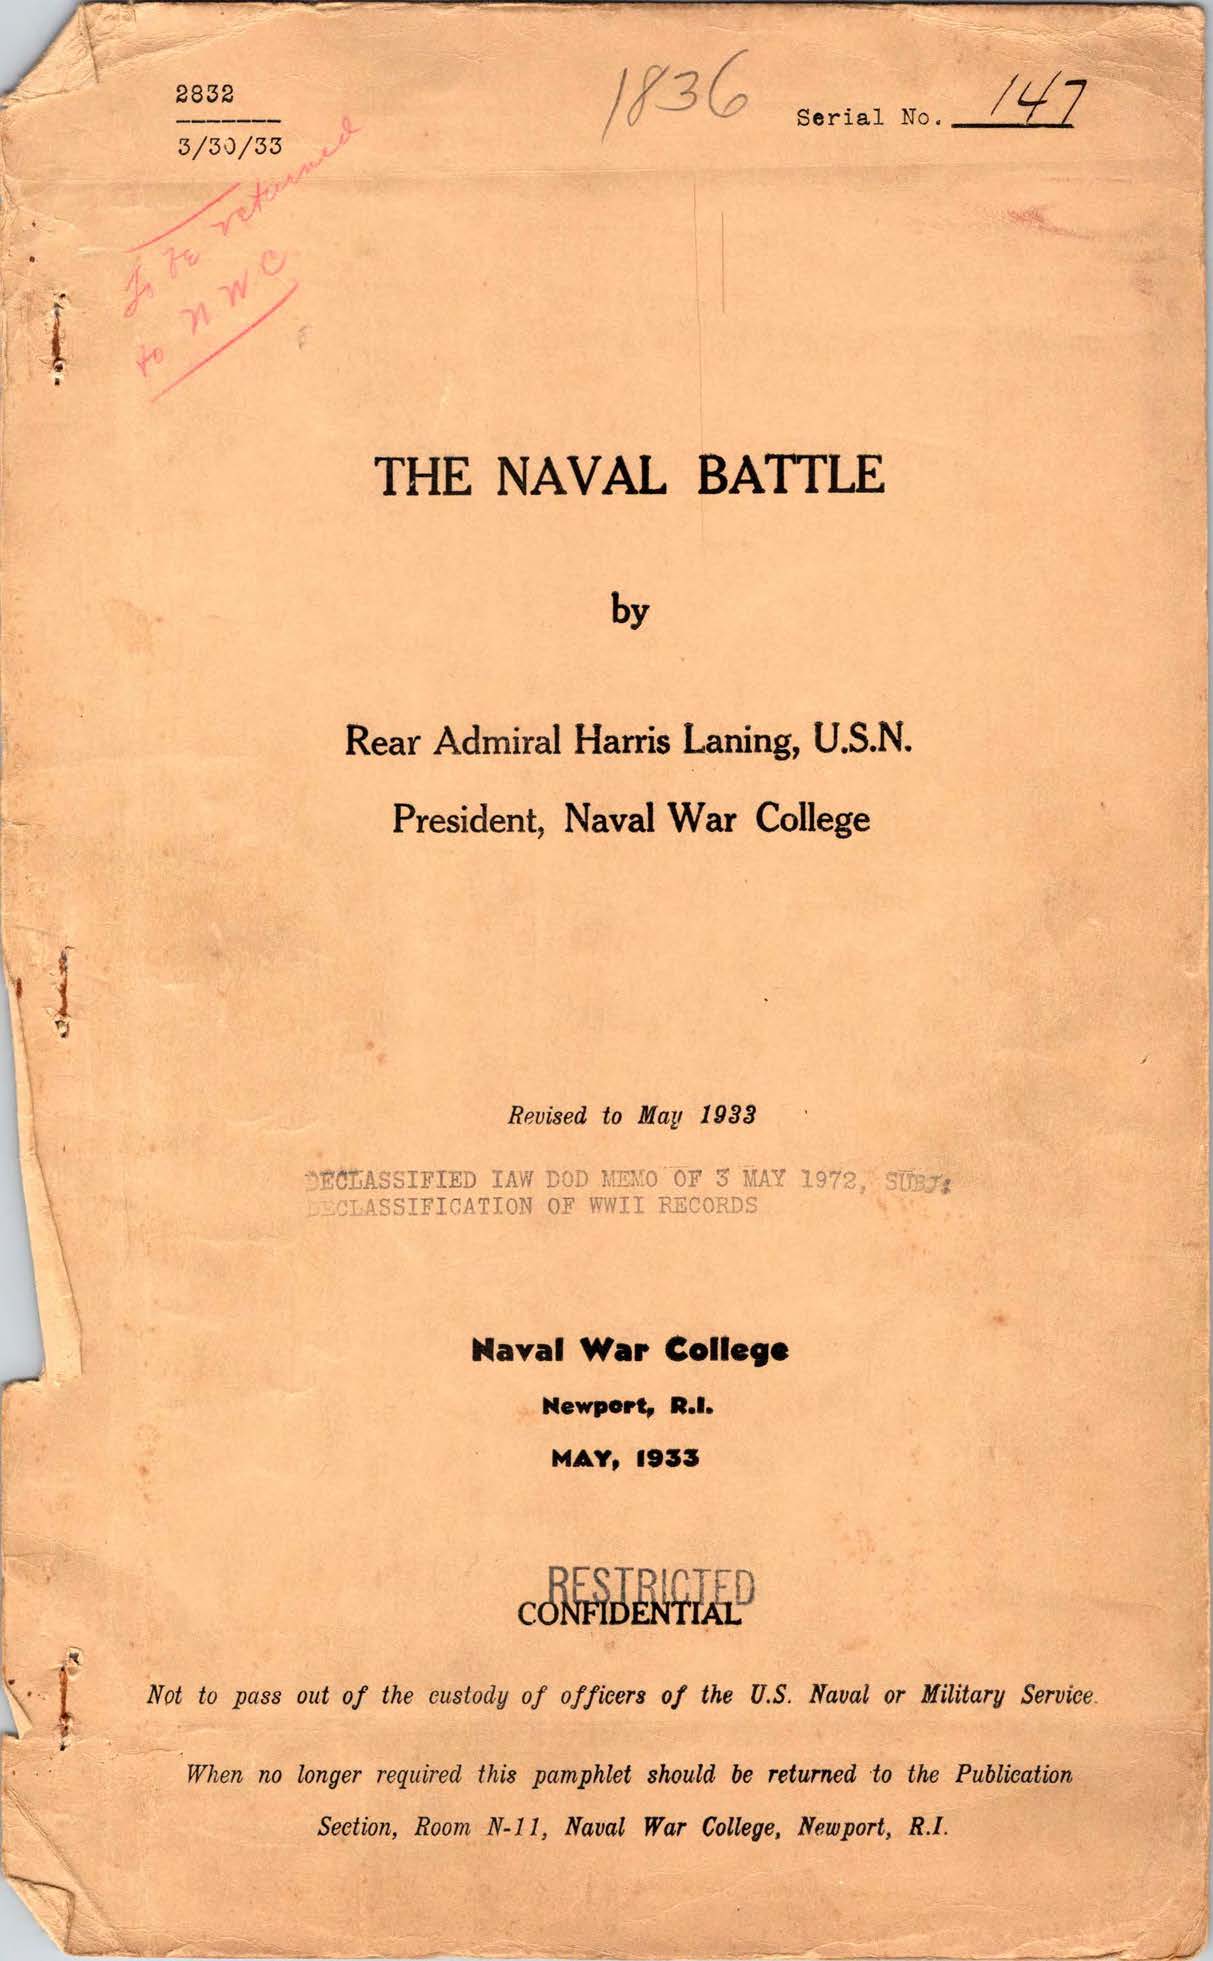 The Naval Battle, by Harris Laning